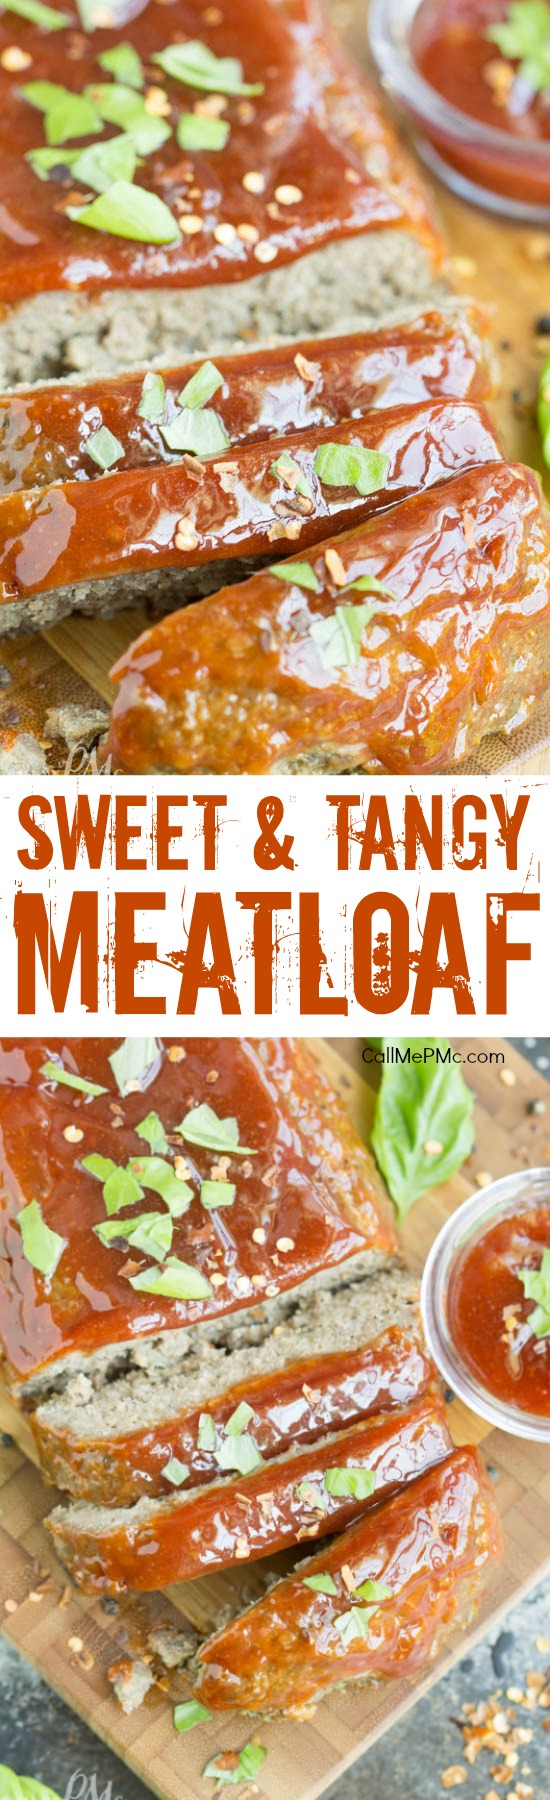  Sweet and Tangy Meat Loaf